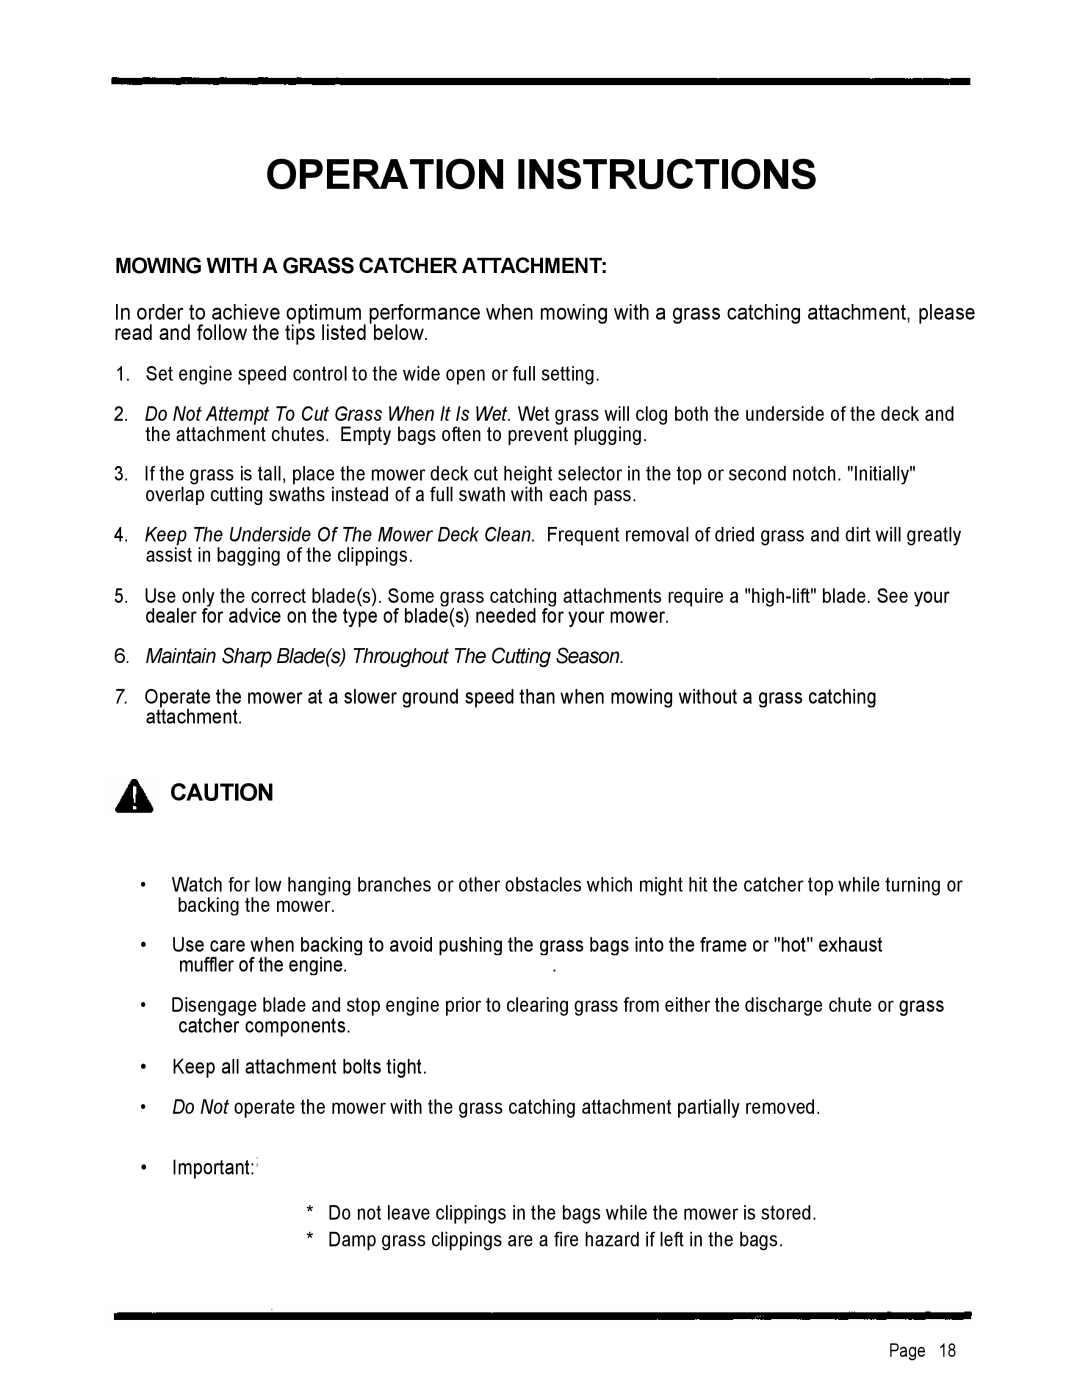 Dixon 2301 manual Operation Instructions, Mowing With A Grass Catcher Attachment 